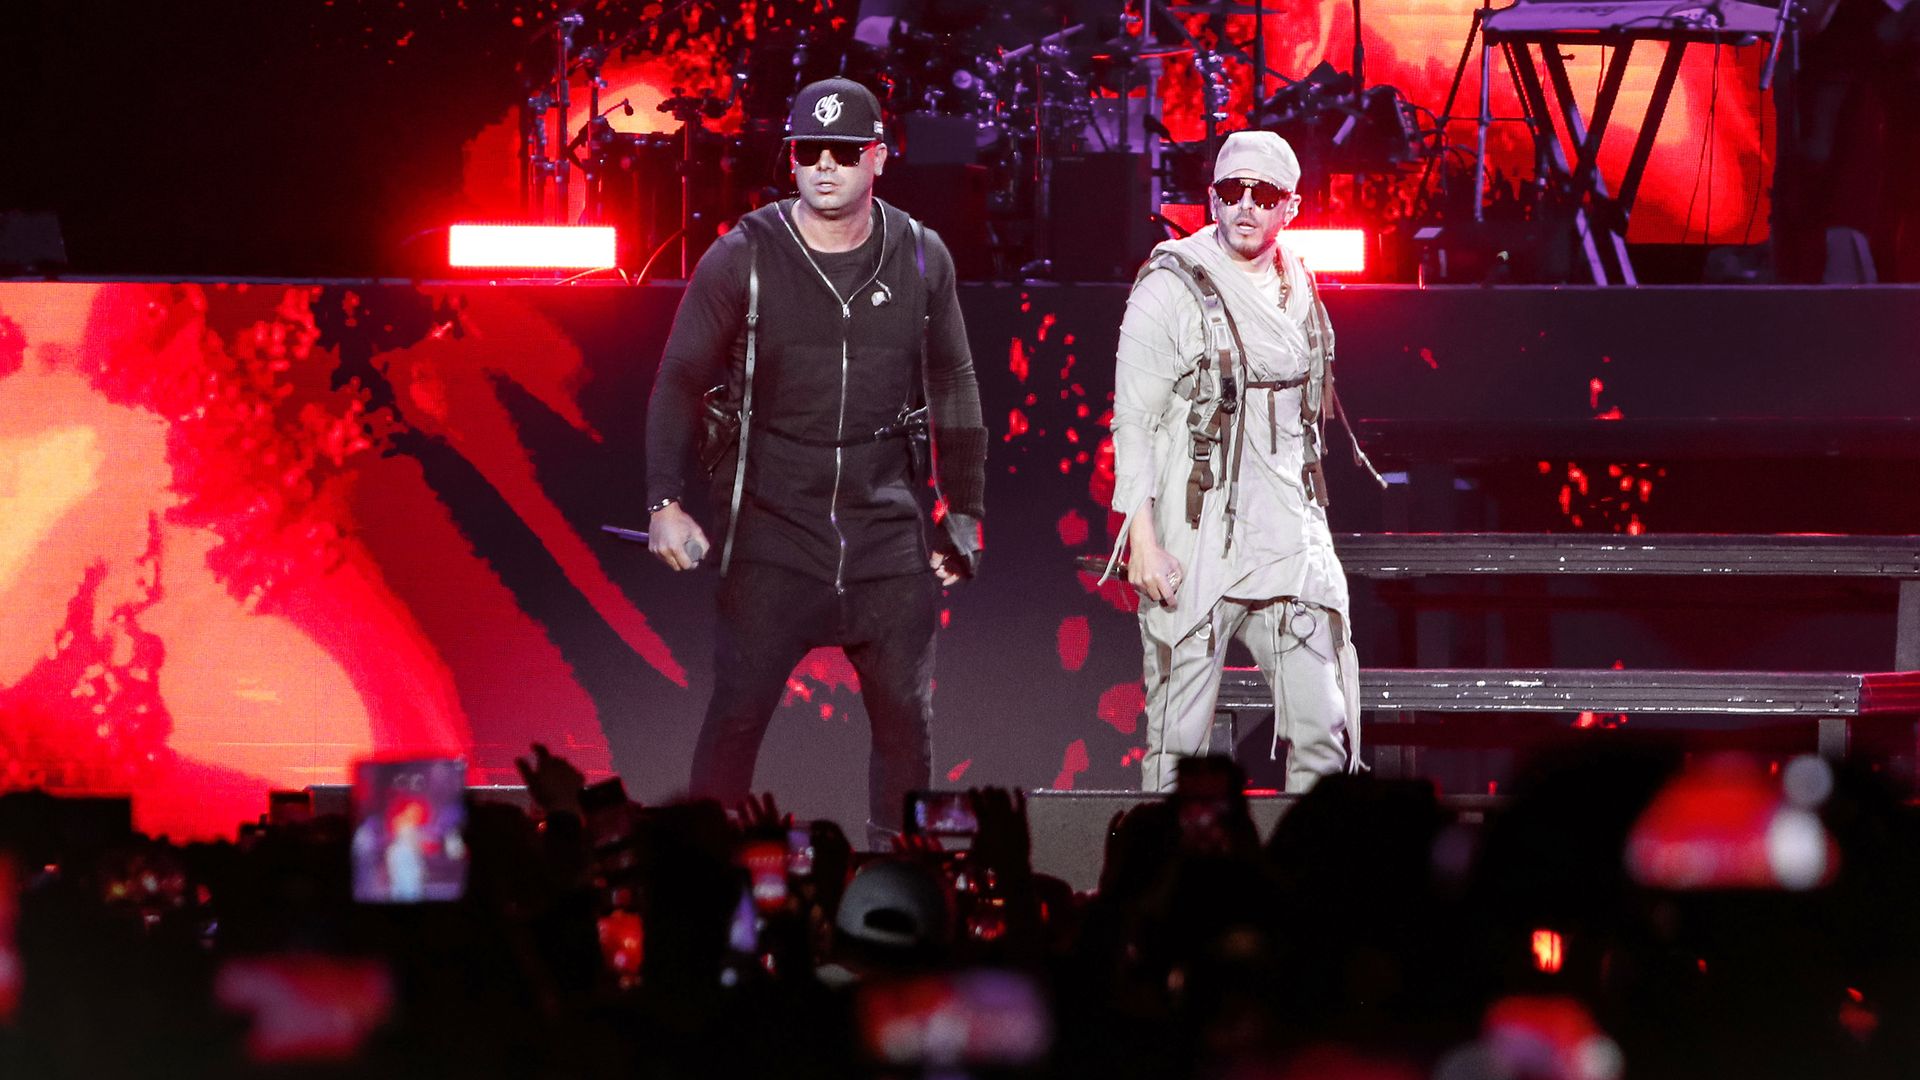 Reggaeton artists Wisin y Yandel onstage with red flame-like optics in the background. 